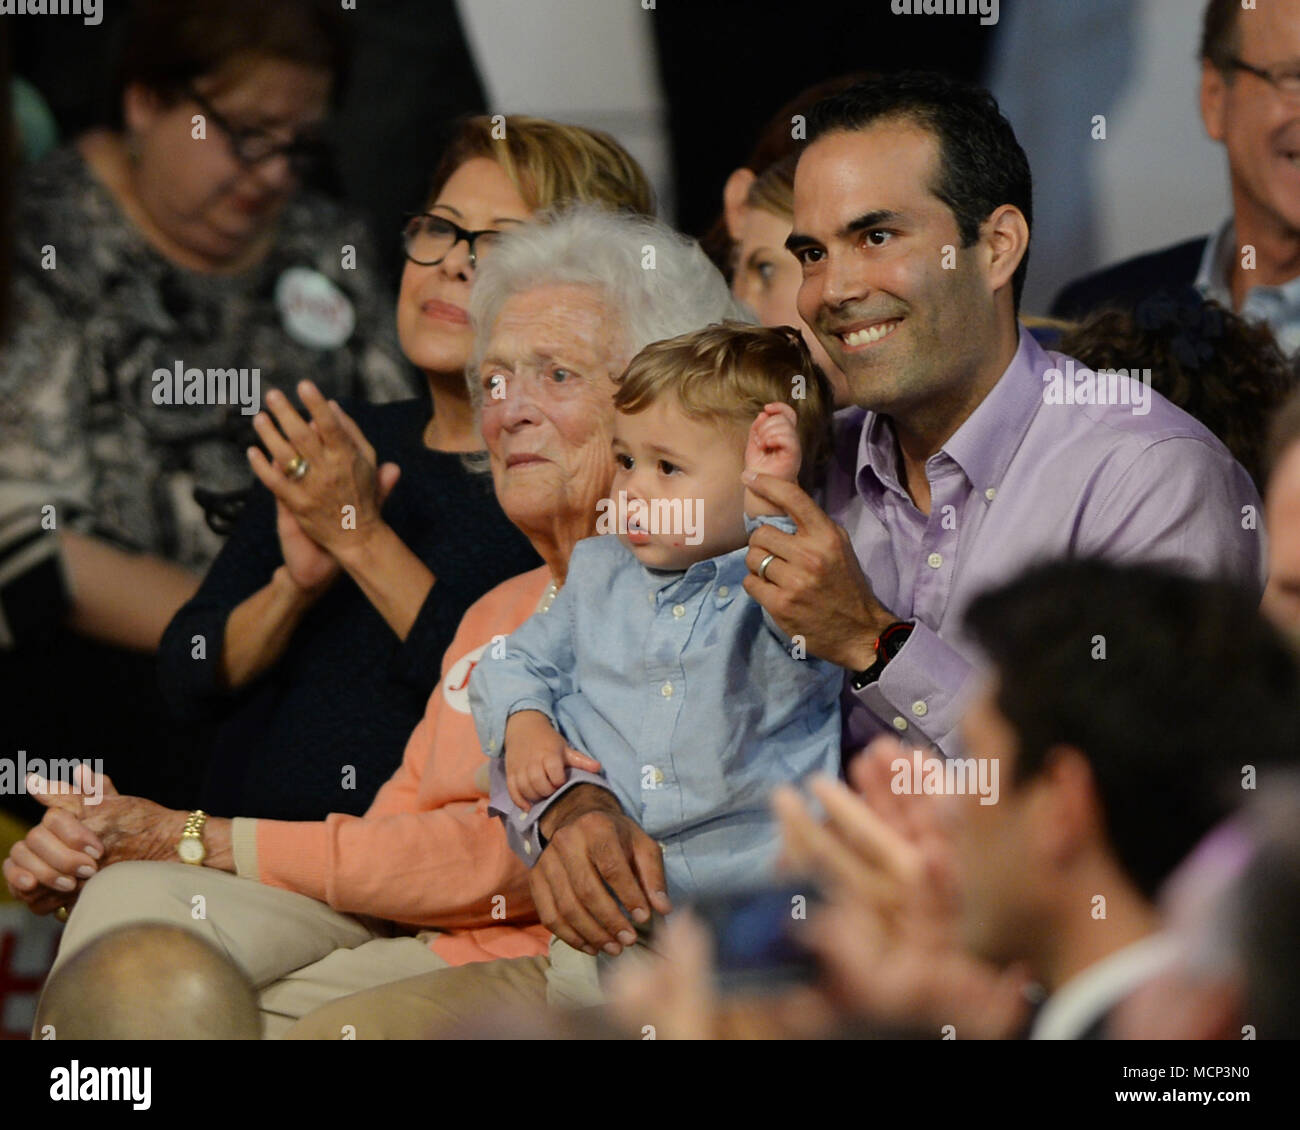 ***FILE PHOO*** BARBARA BUSH HAS PASSED AWAY (1925-2018) MIAMI, FL - JUNE 15: Columba Bush, Barbara Bush and George P. Bush as Former Florida Governor Jeb Bush announces his candidacy for the 2016 Republican Presidential nomination during a rally at Miami Dade College on June 15, 2015 in Miami, Florida. Credit: mpi04/MediaPunch Stock Photo